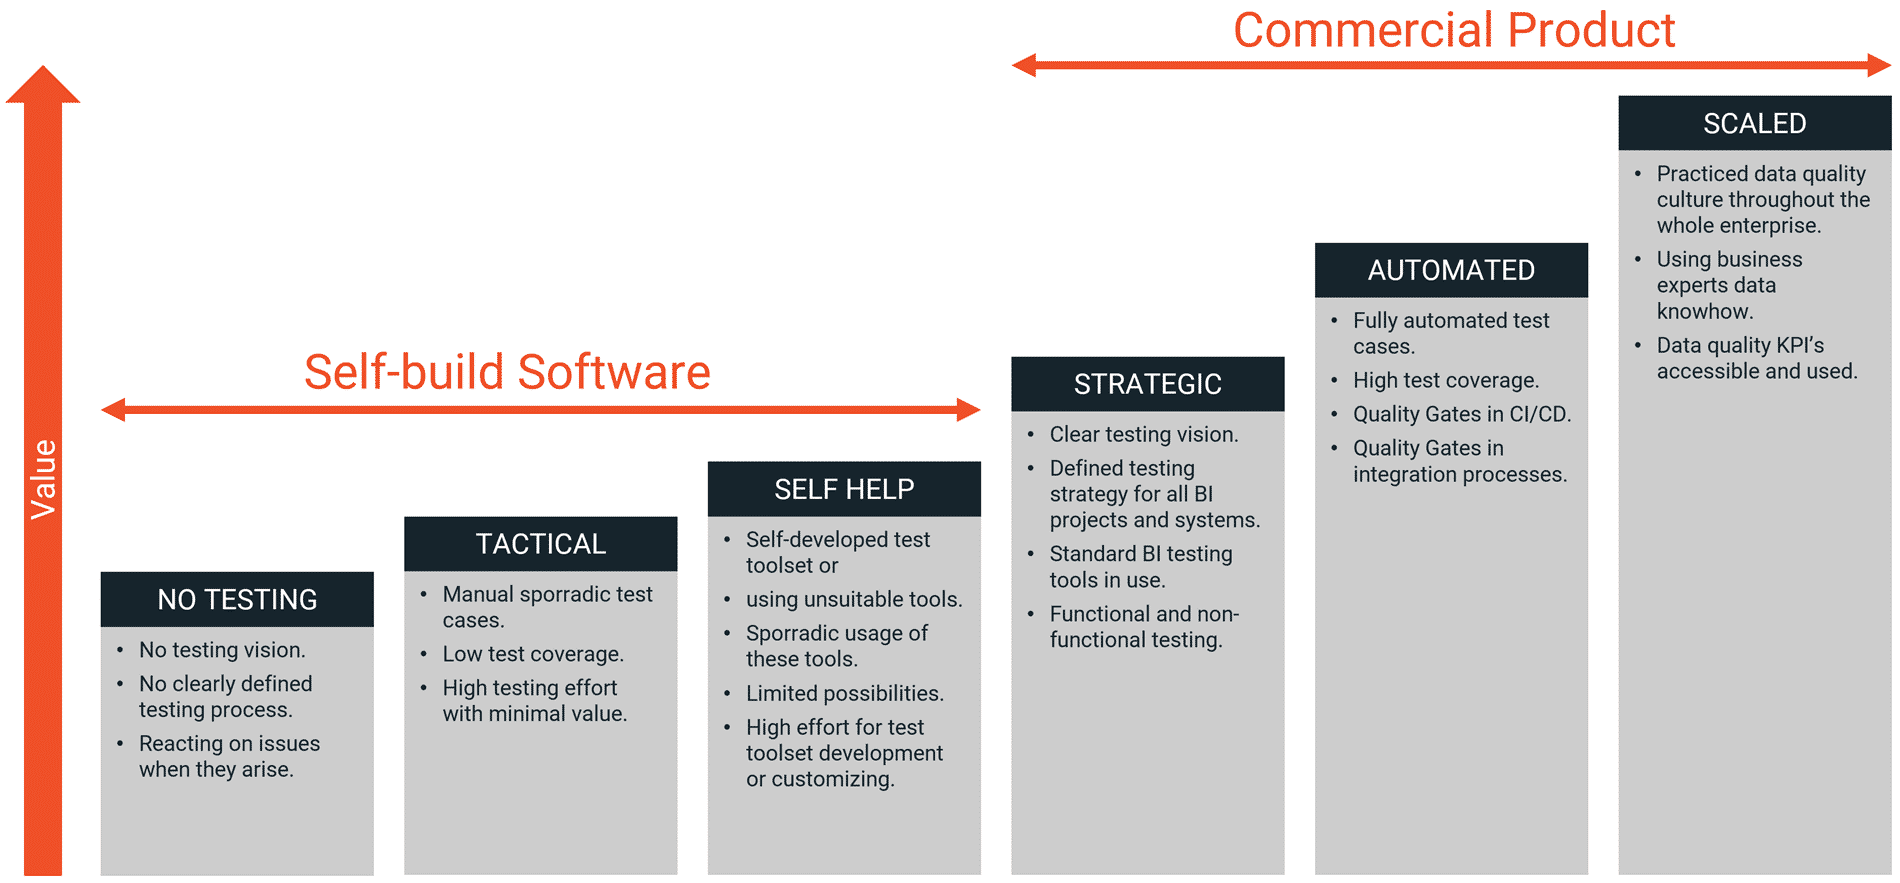 Maturity of Self-Build vs Commercial Data Quality Software